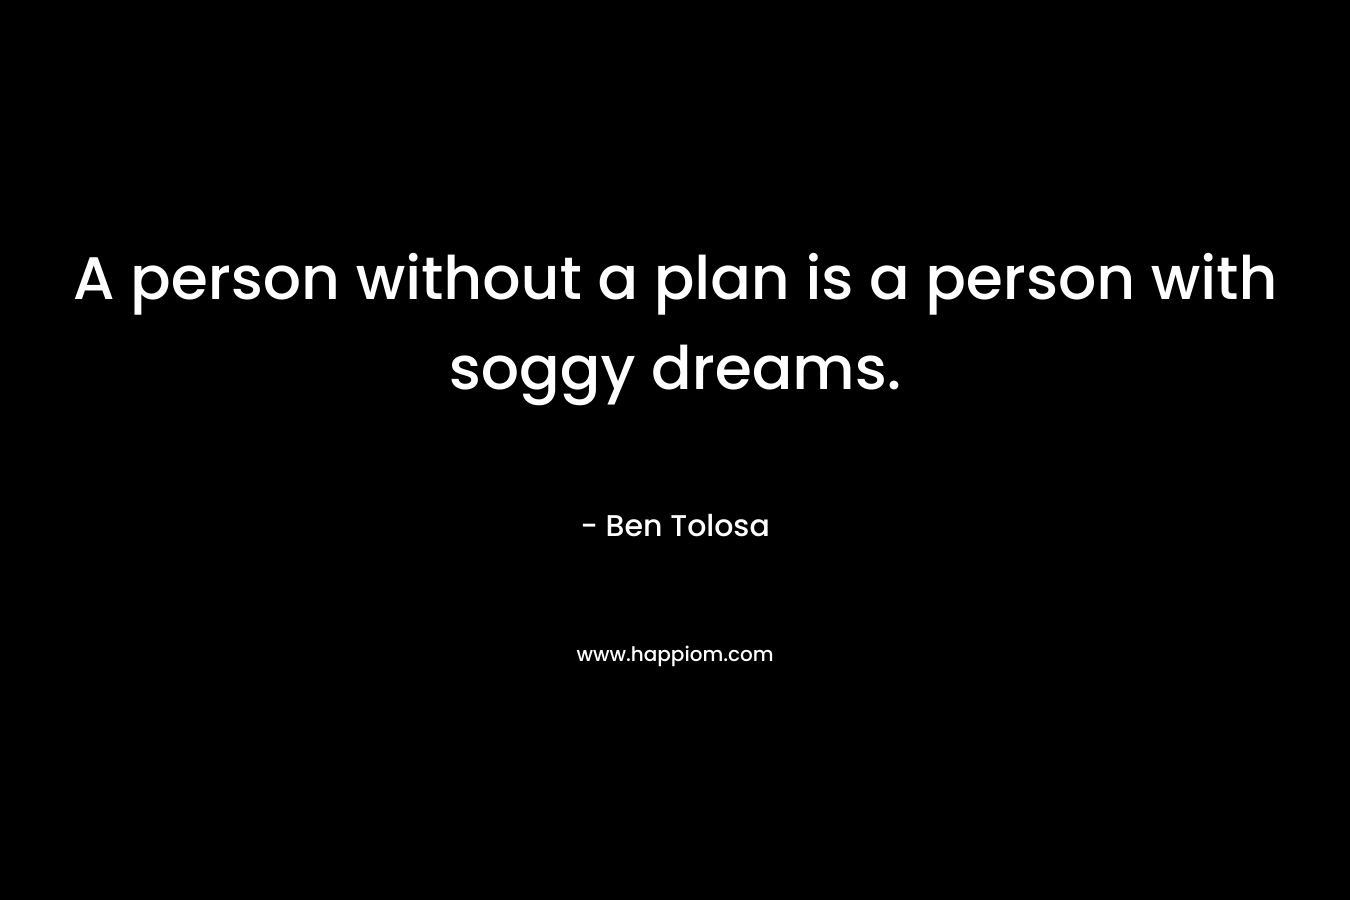 A person without a plan is a person with soggy dreams. – Ben Tolosa